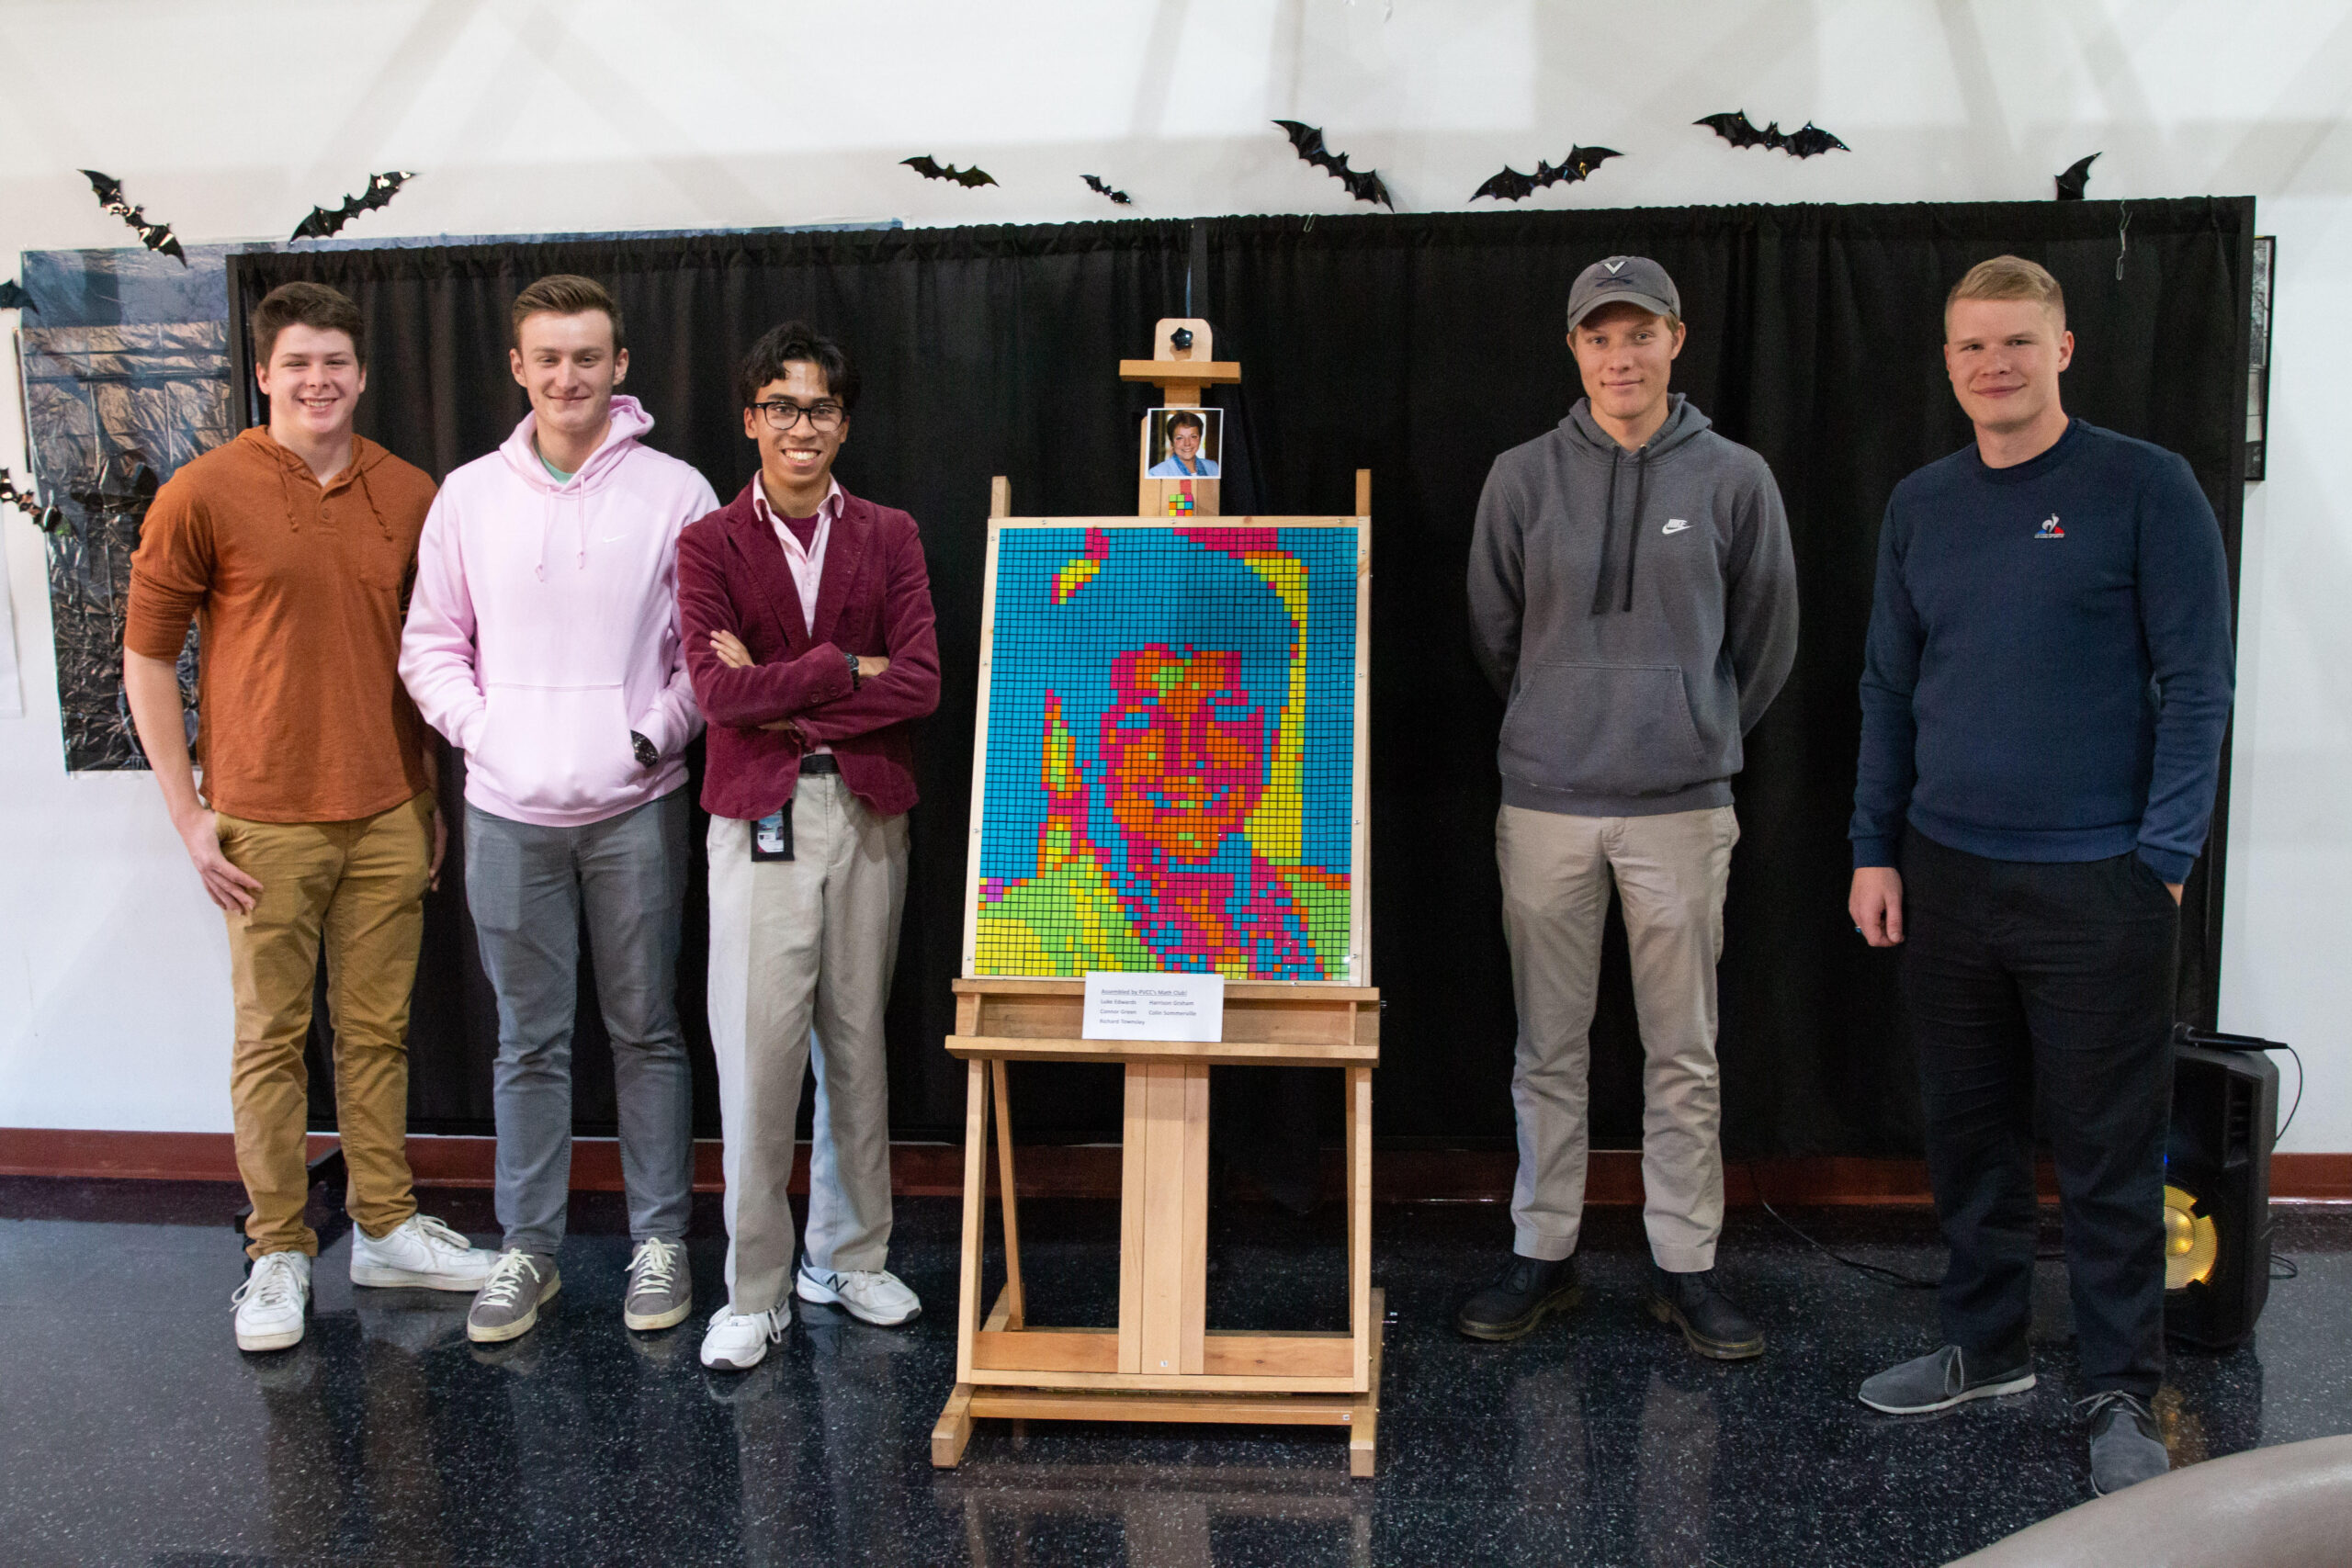 Members of the math club pose around the Rubik's cube portrait of Dr. Jean Runyon.